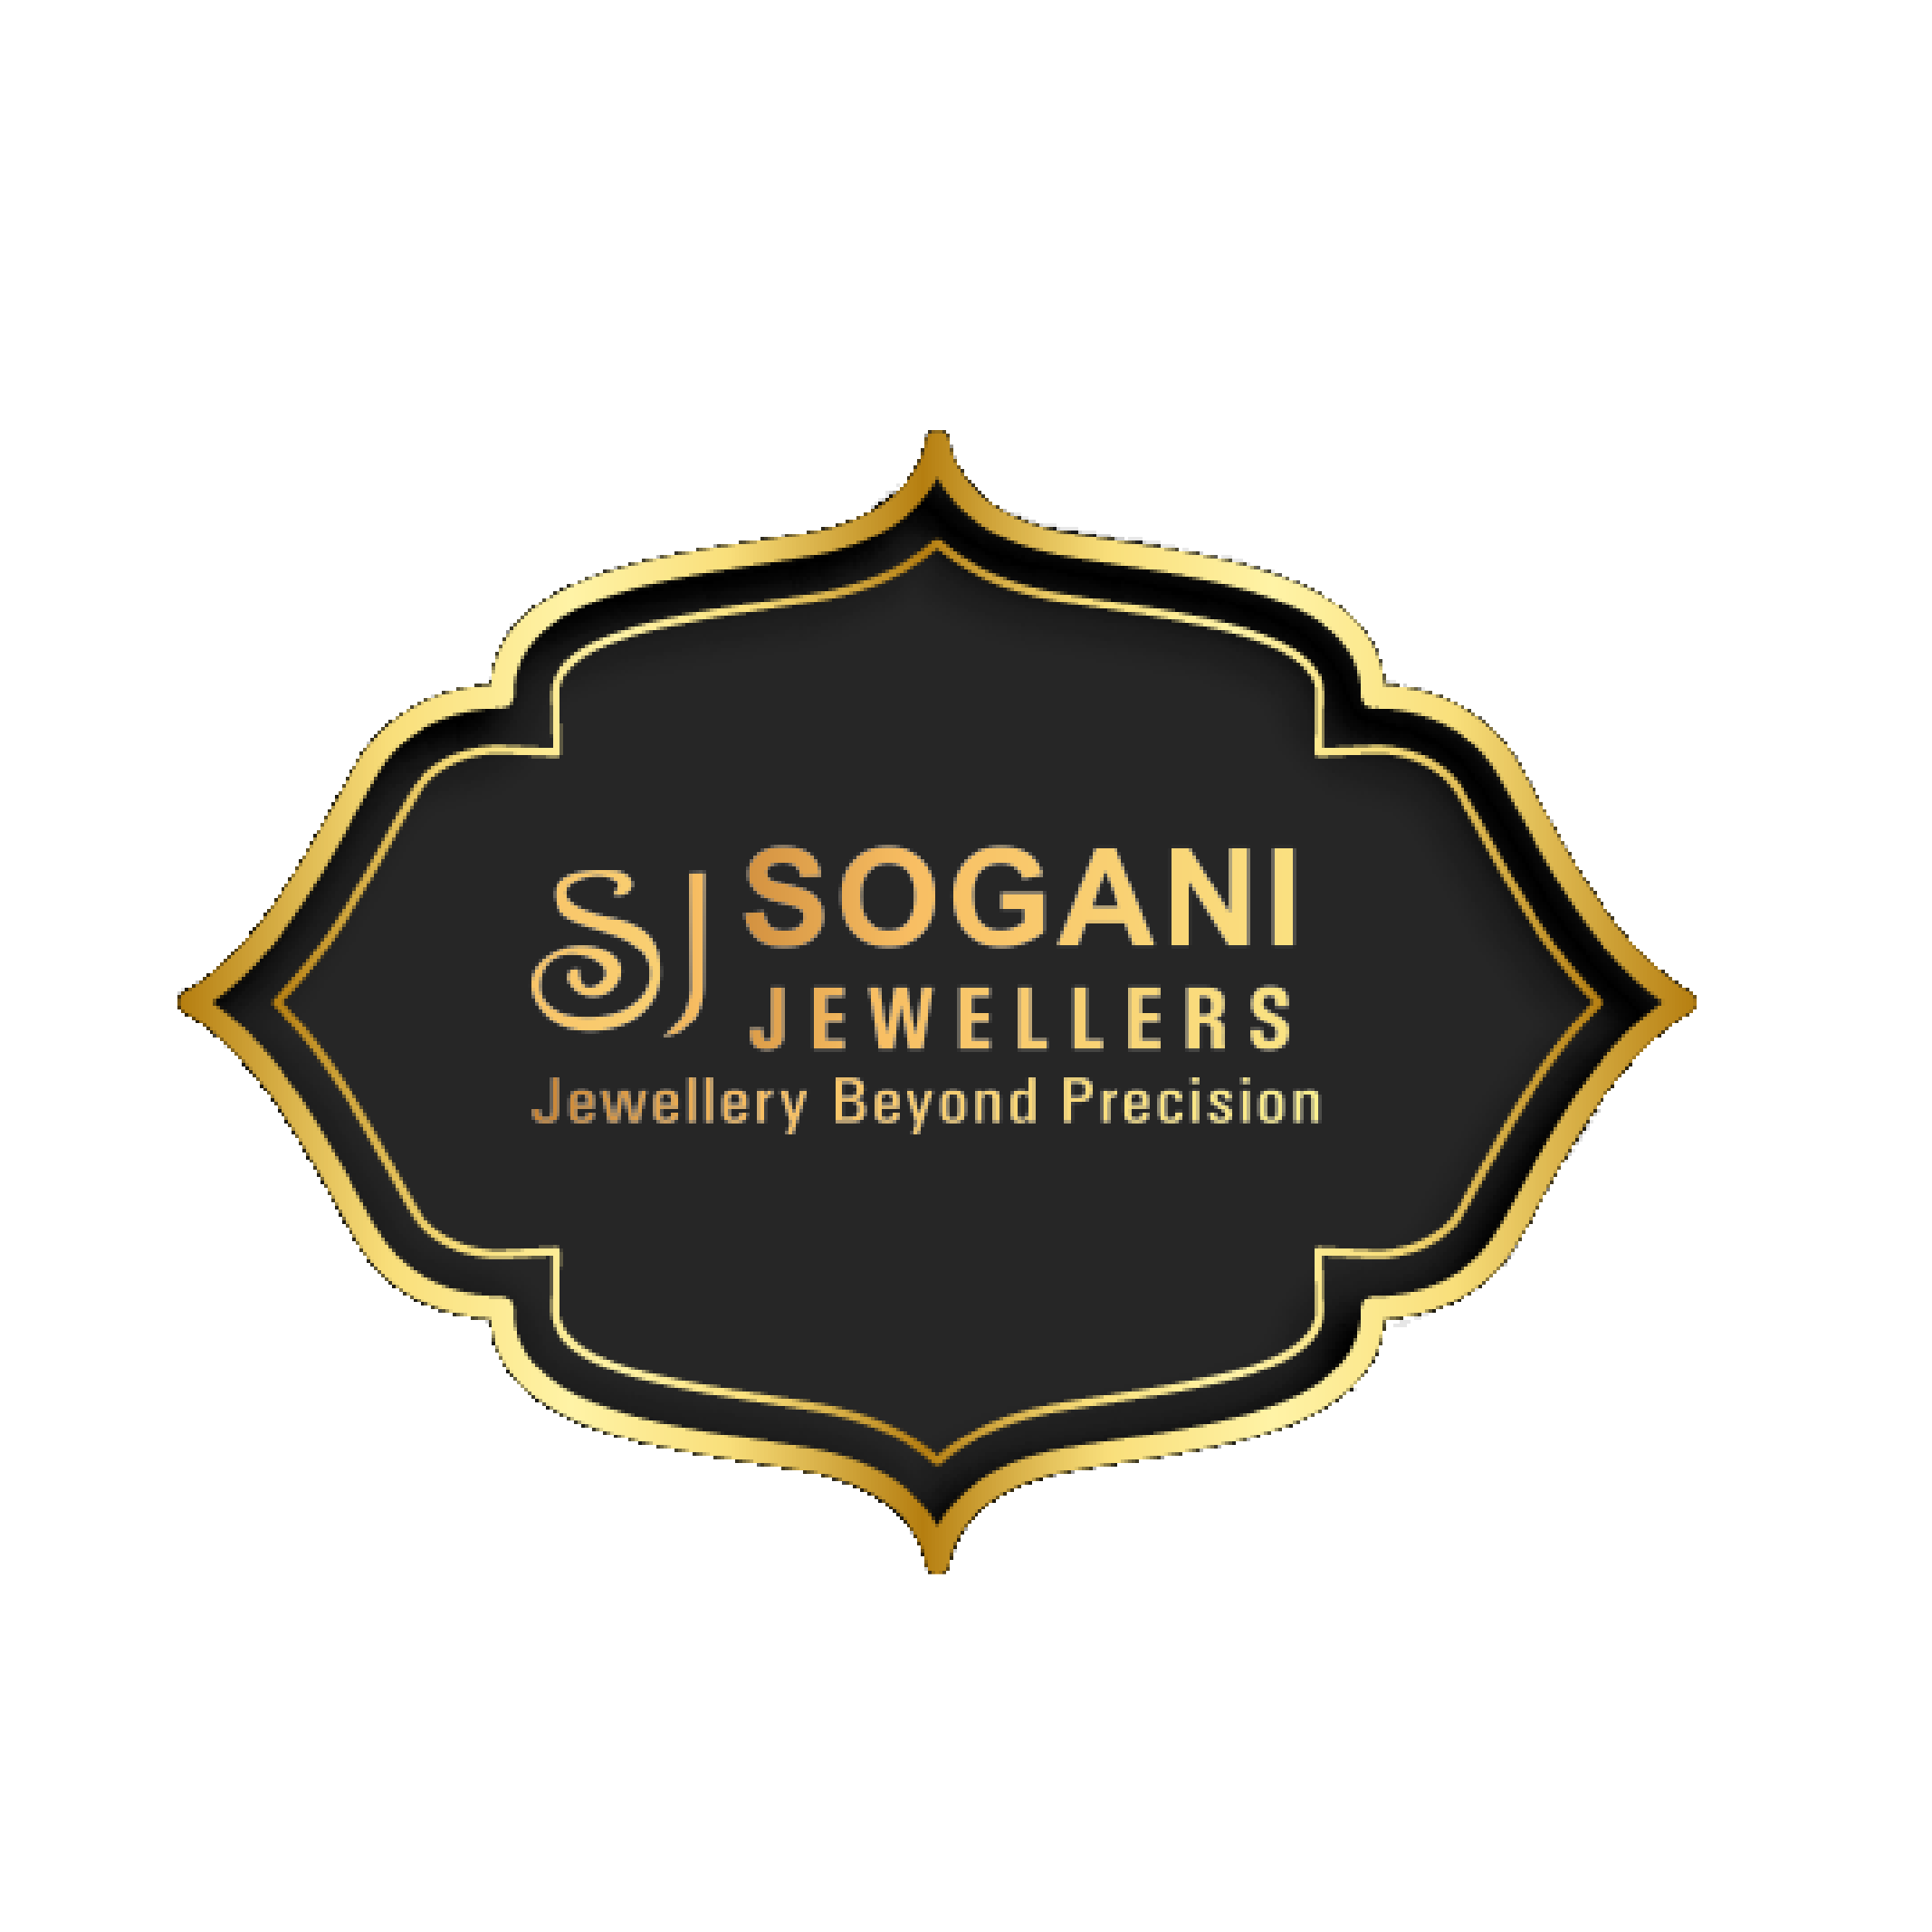 Brand Building Project for Sogani Jewelers, Jaipur